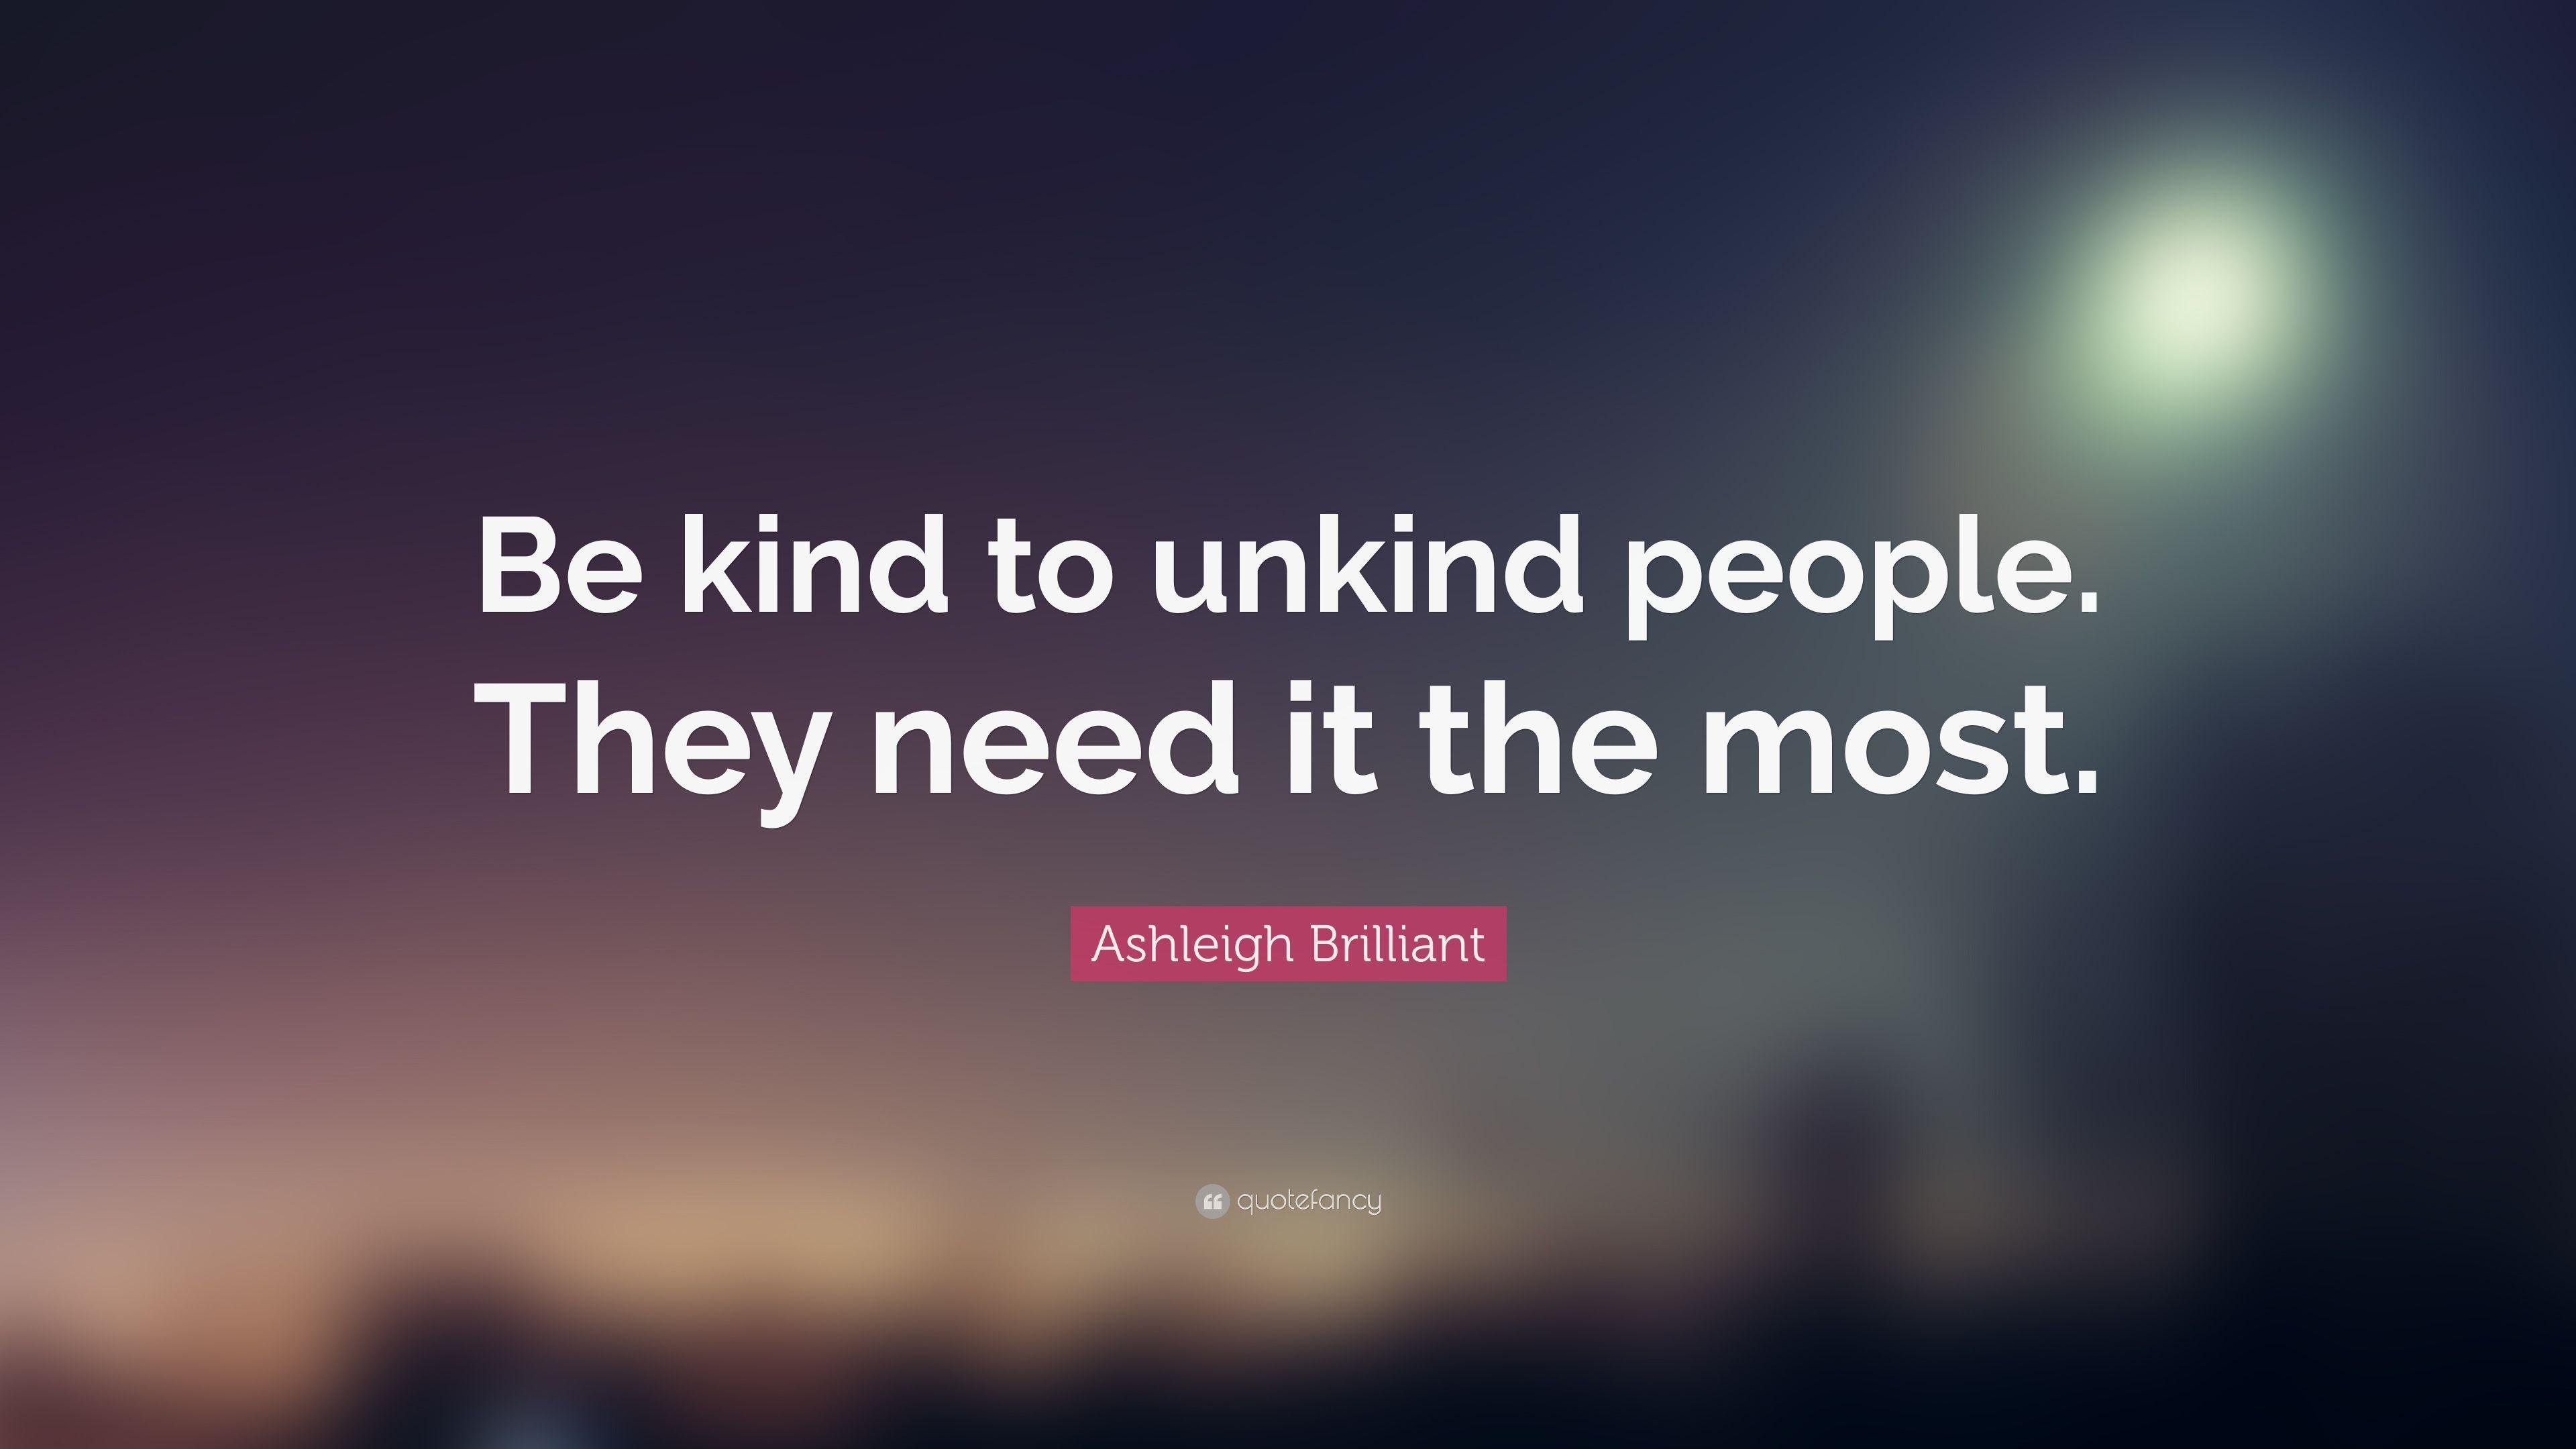 Ashleigh Brilliant Quote: “Be kind to unkind people. They need it